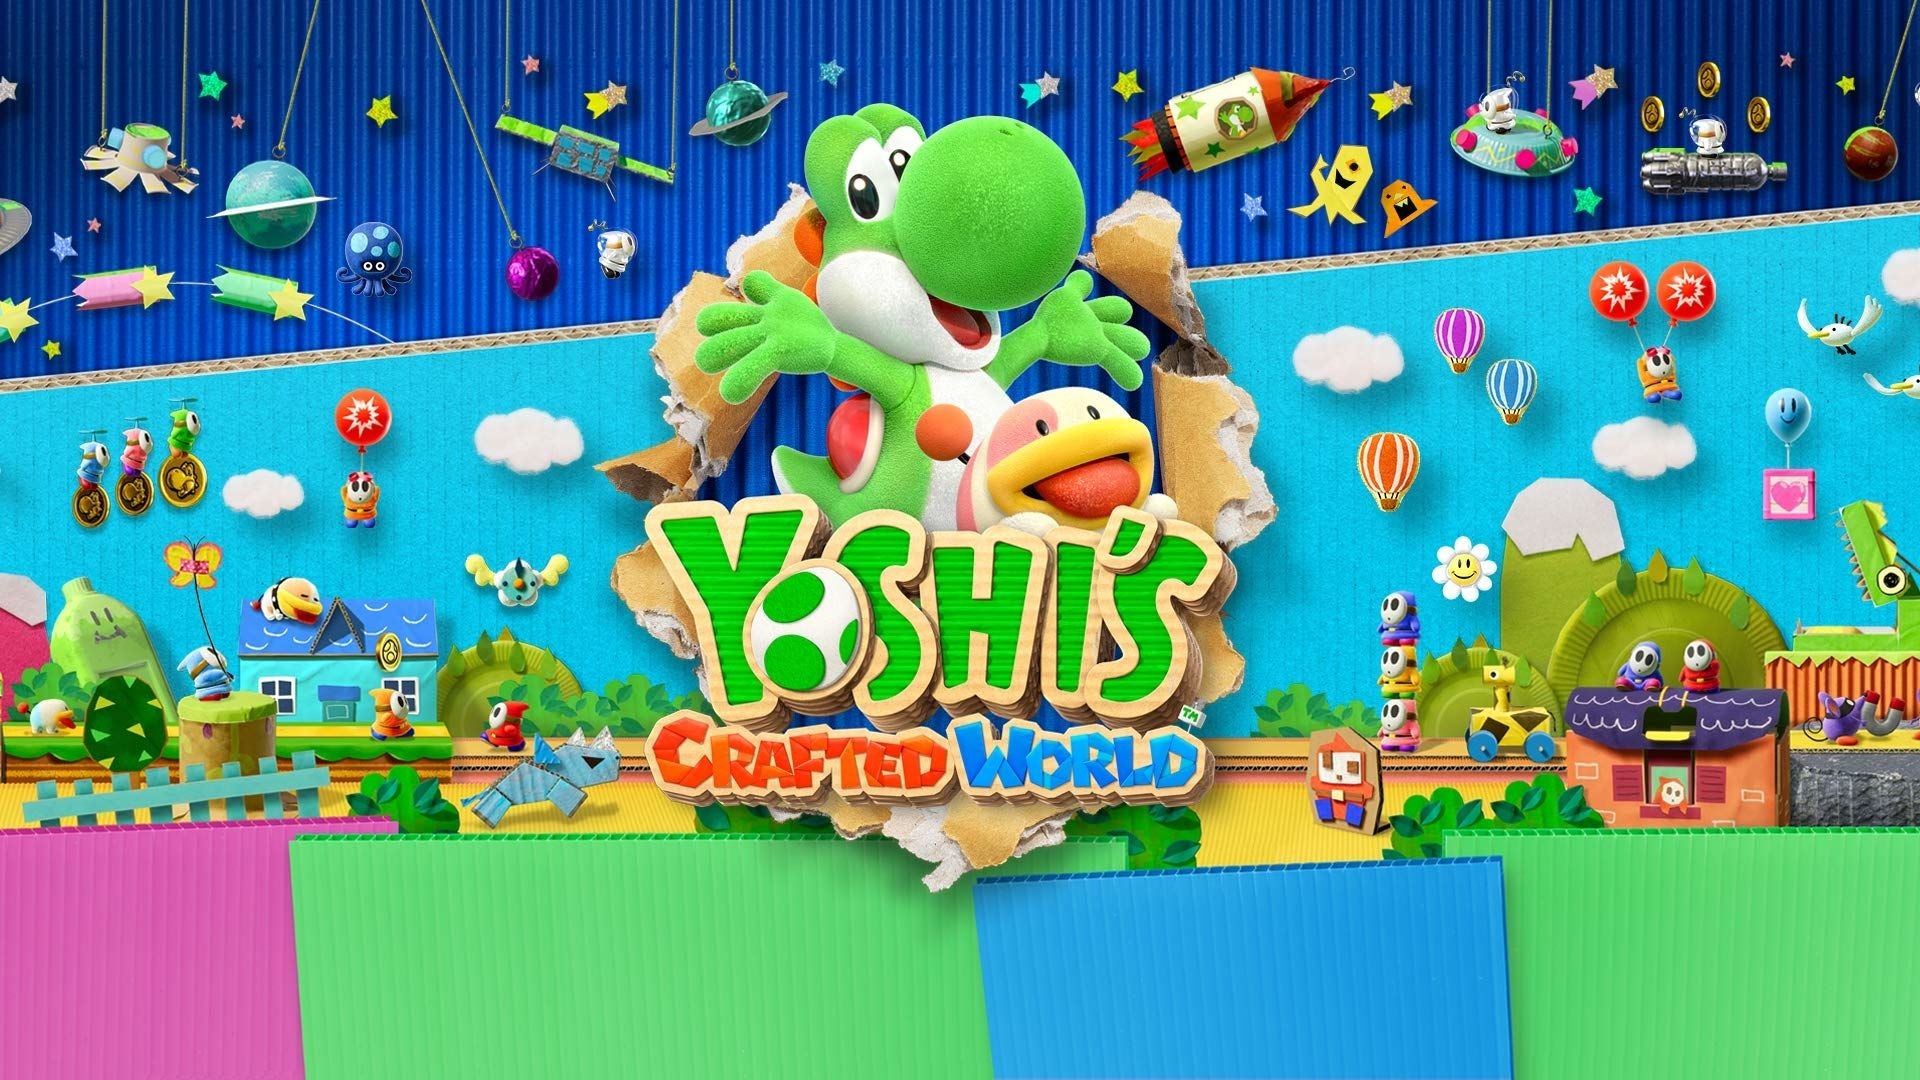 1920x1080 Yoshi's Crafted World HD Wallpaper | Background Image |  .